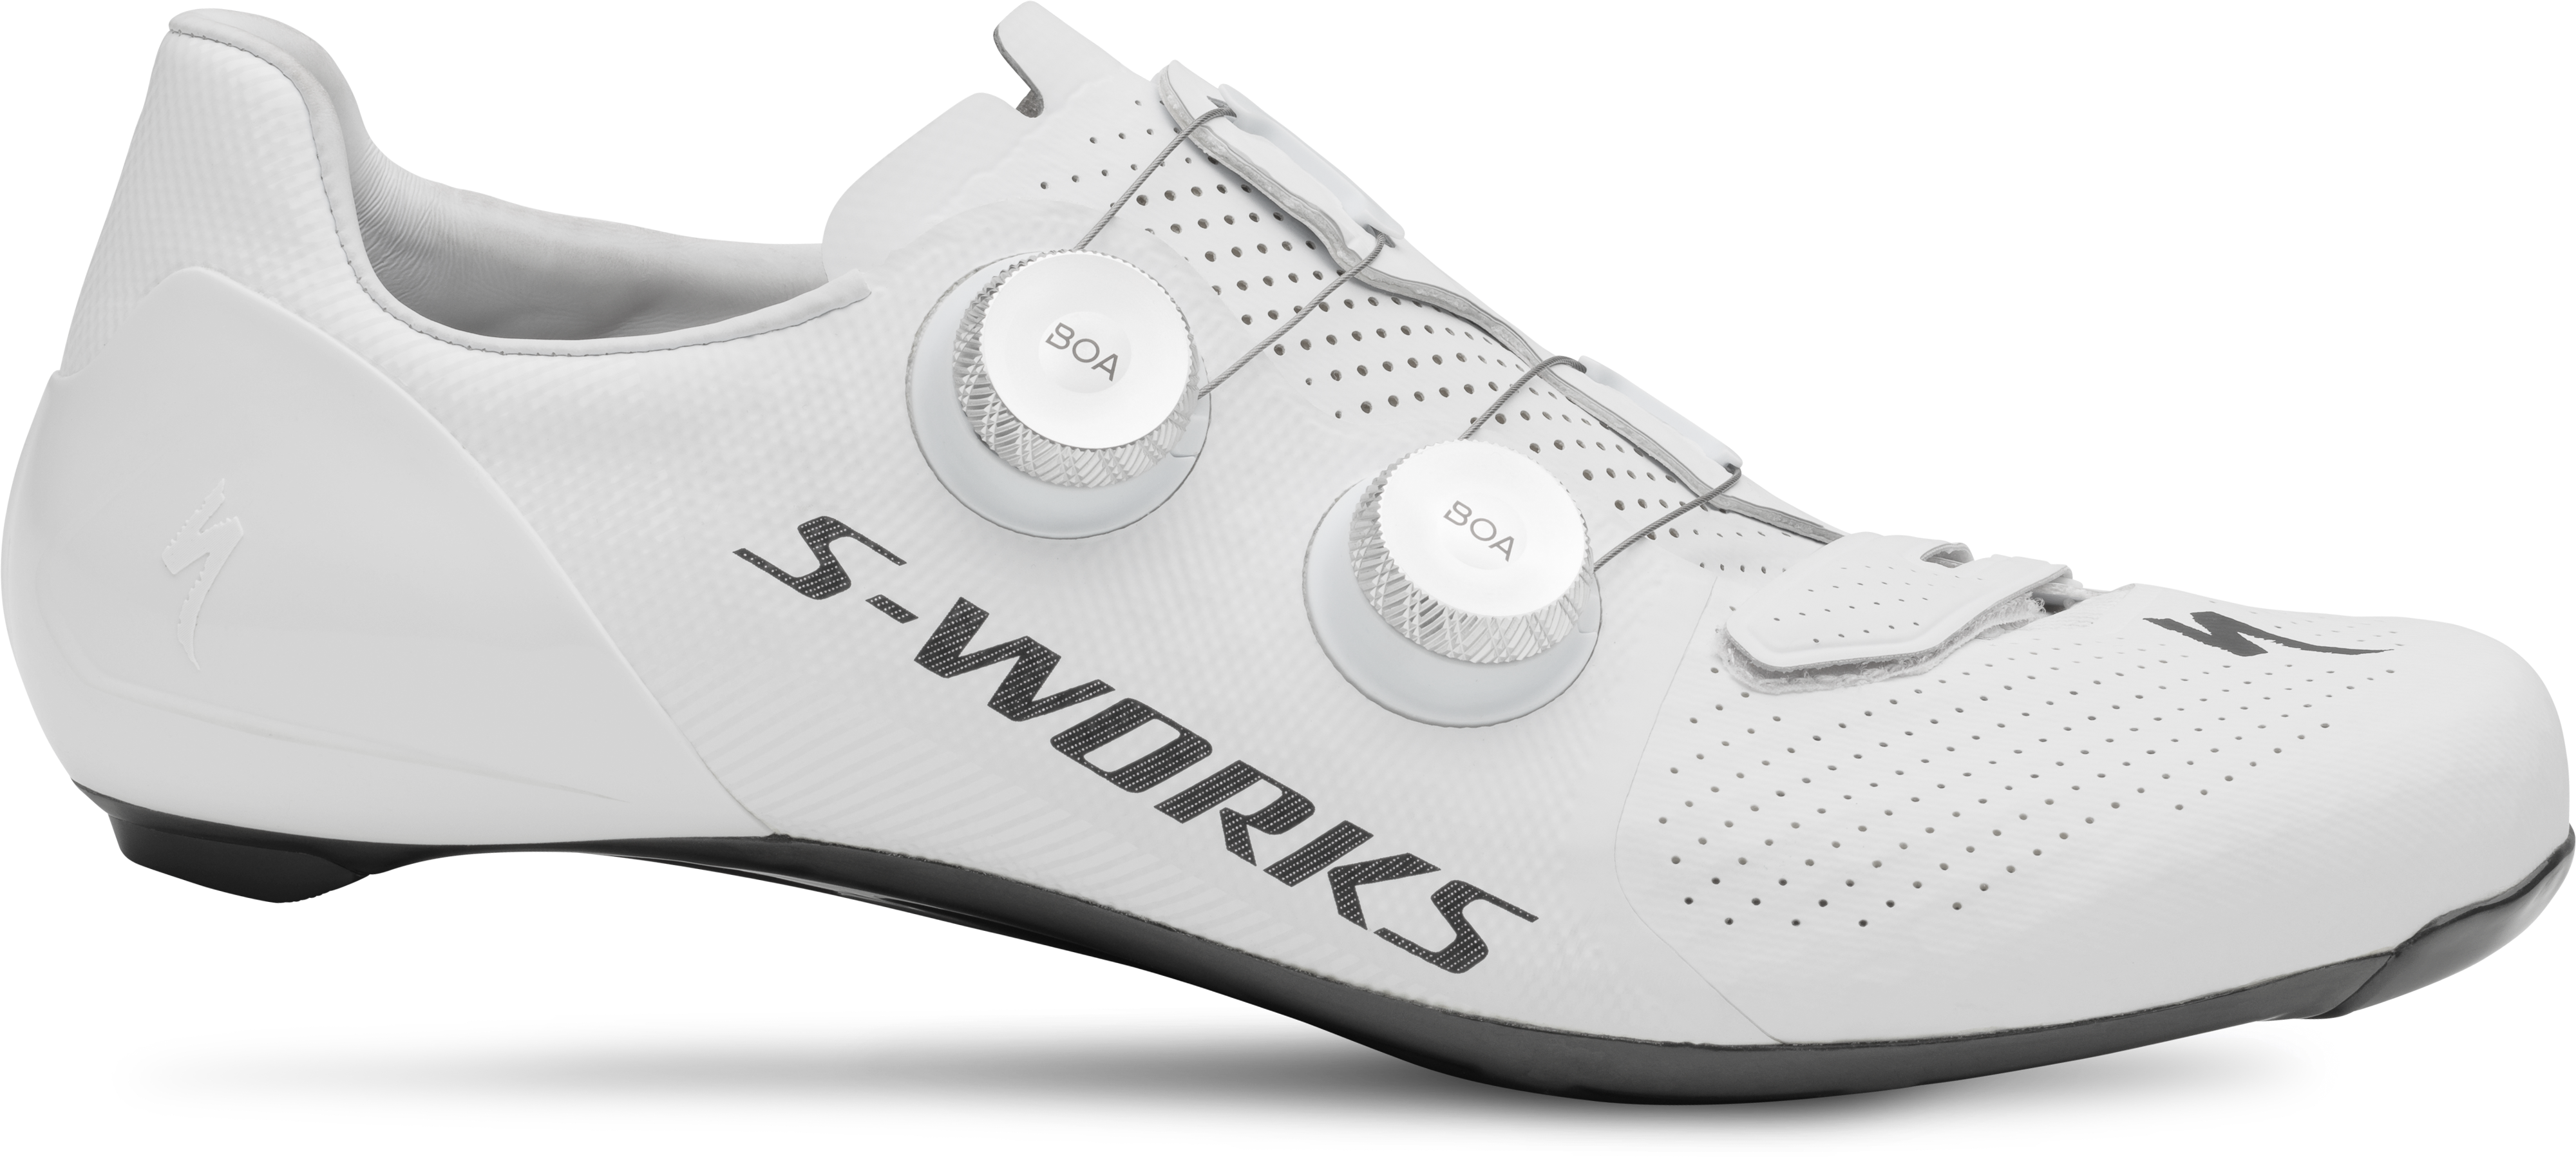 S-WORKS ROAD SHOES